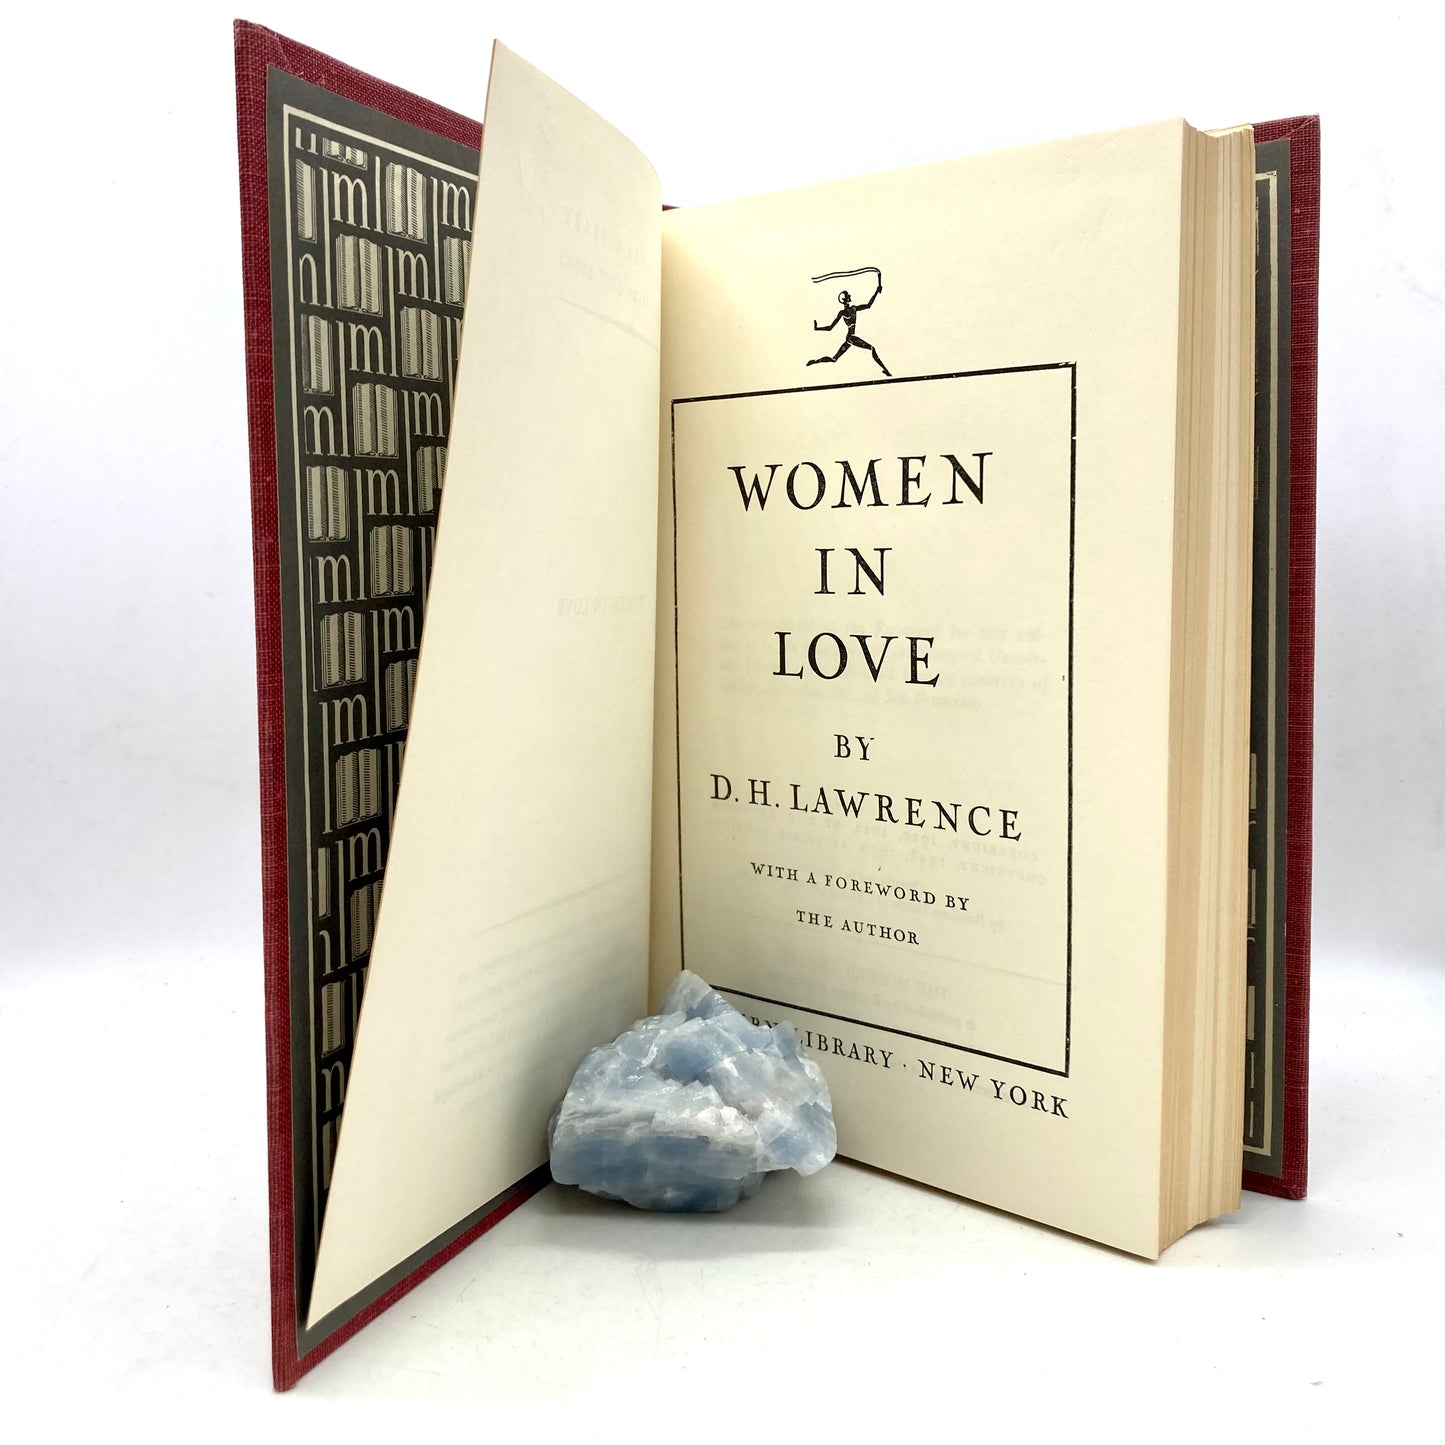 LAWRENCE, D.H. "Women In Love" [Modern Library, 1950] - Buzz Bookstore